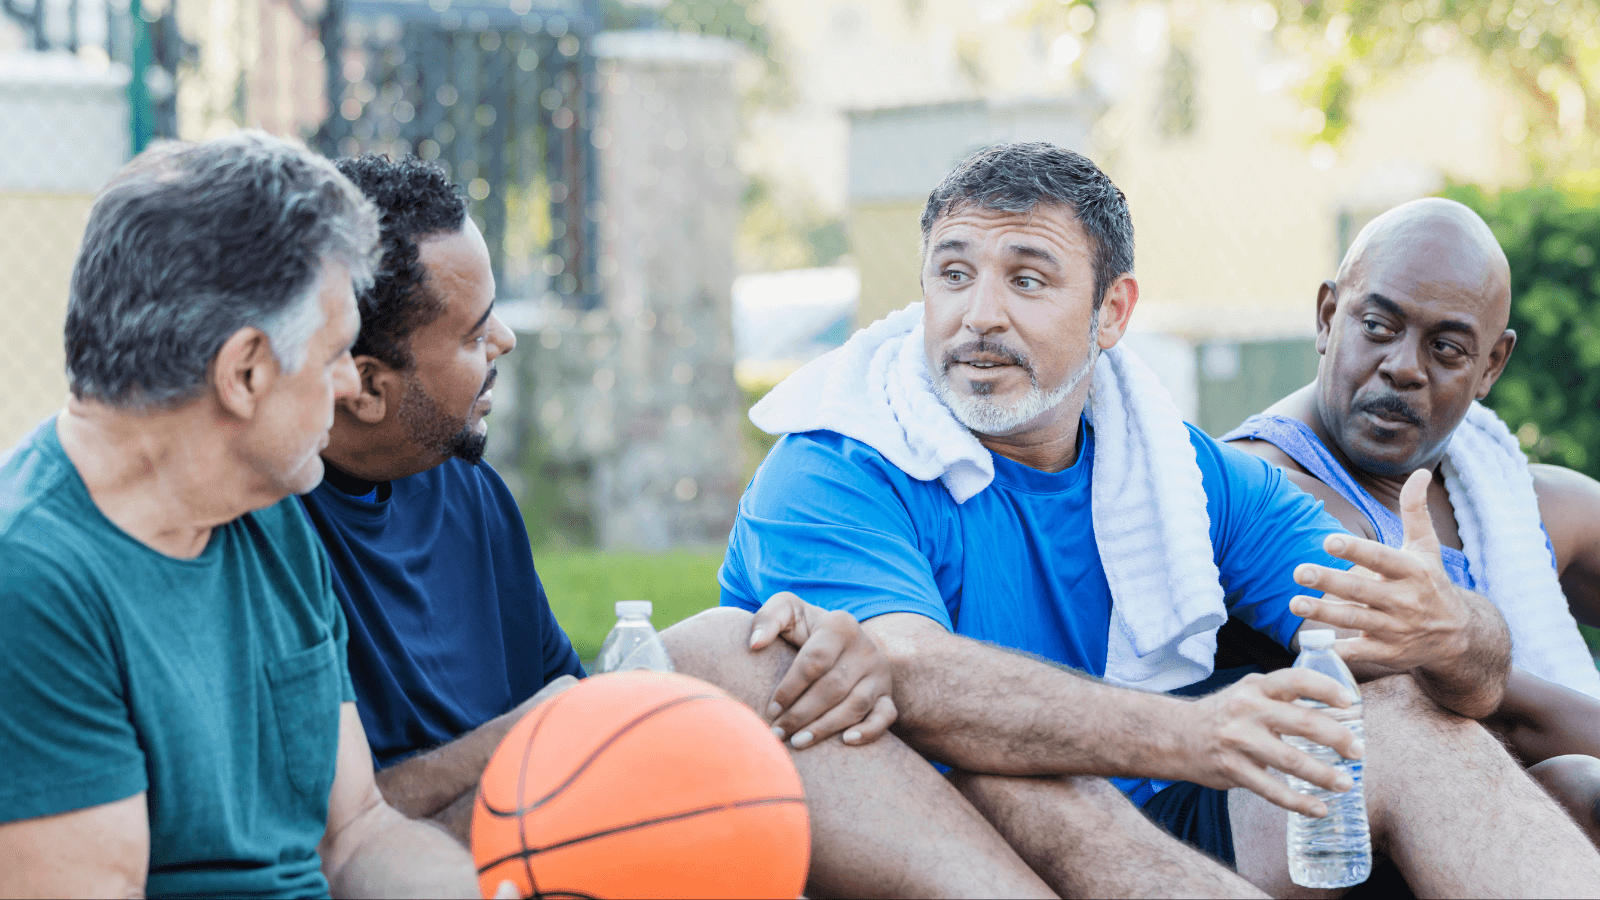 Men hanging out after playing basketball